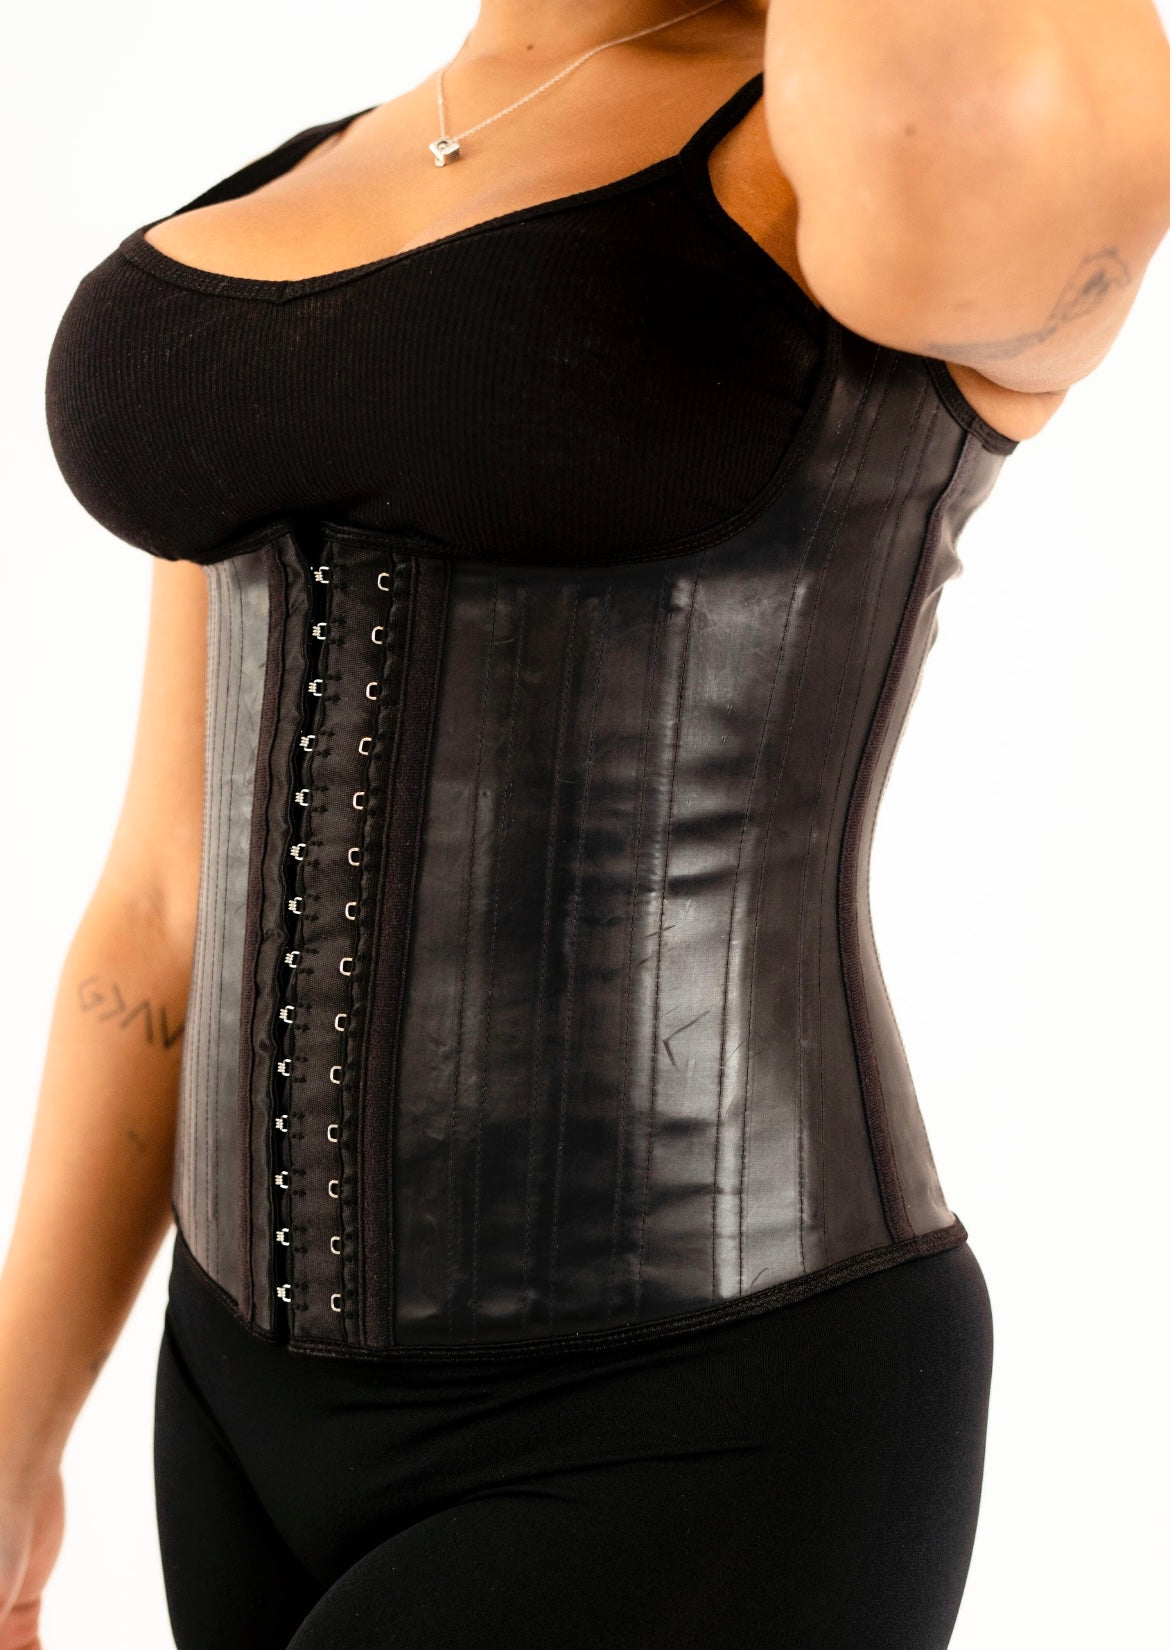 Find Cheap, Fashionable and Slimming steel boned waist trainer corset 